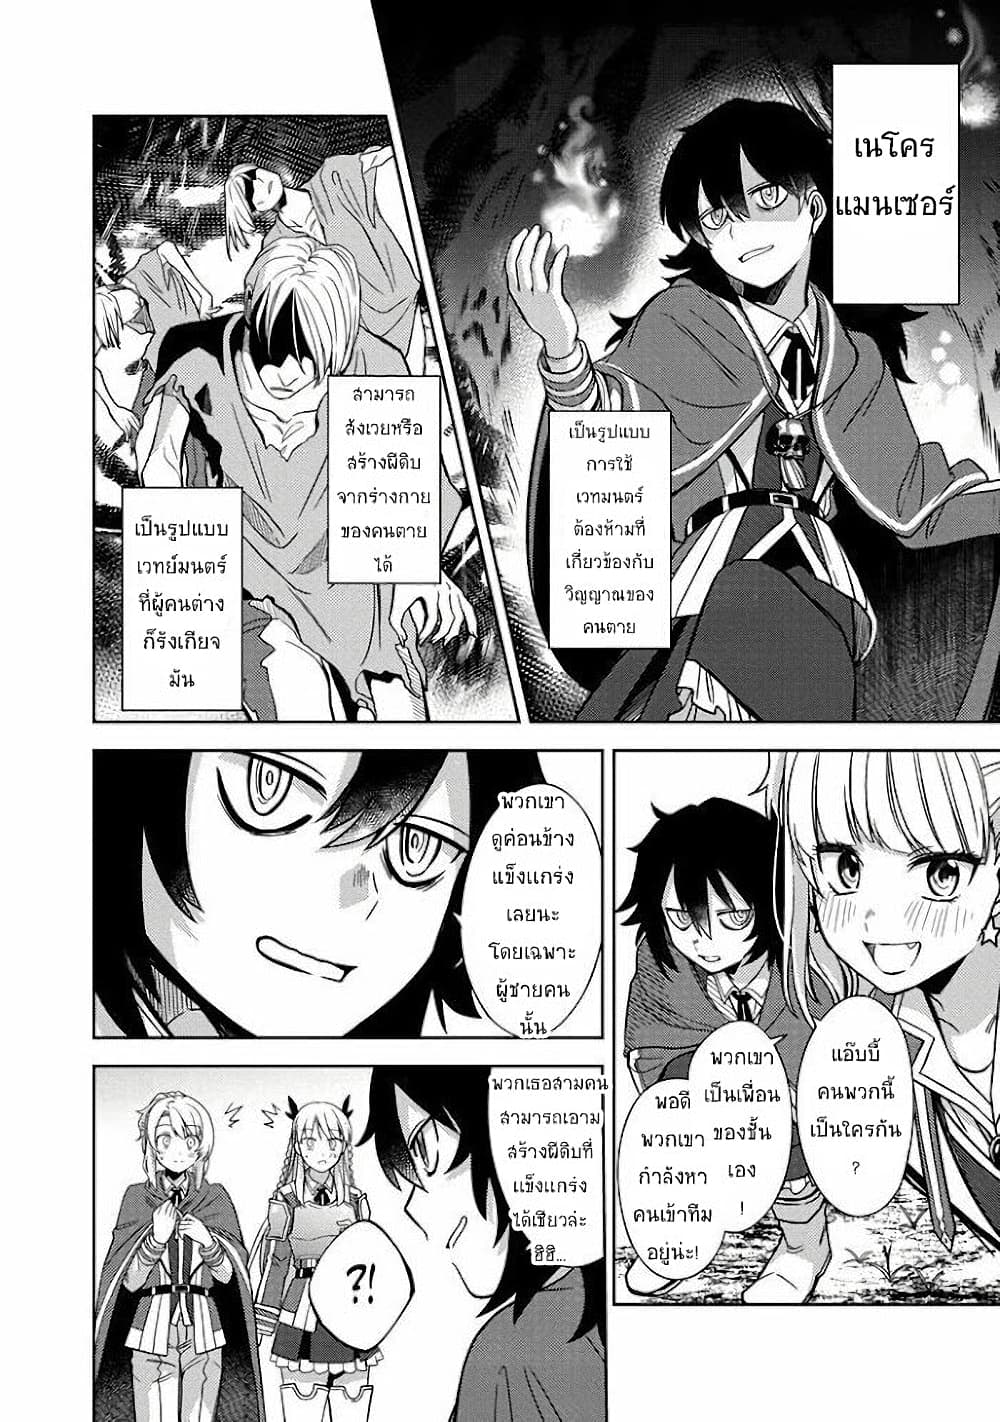 The Reincarnated Swordsman With 9999 Strength Wants to Become a Magician! ตอนที่ 5 (18)